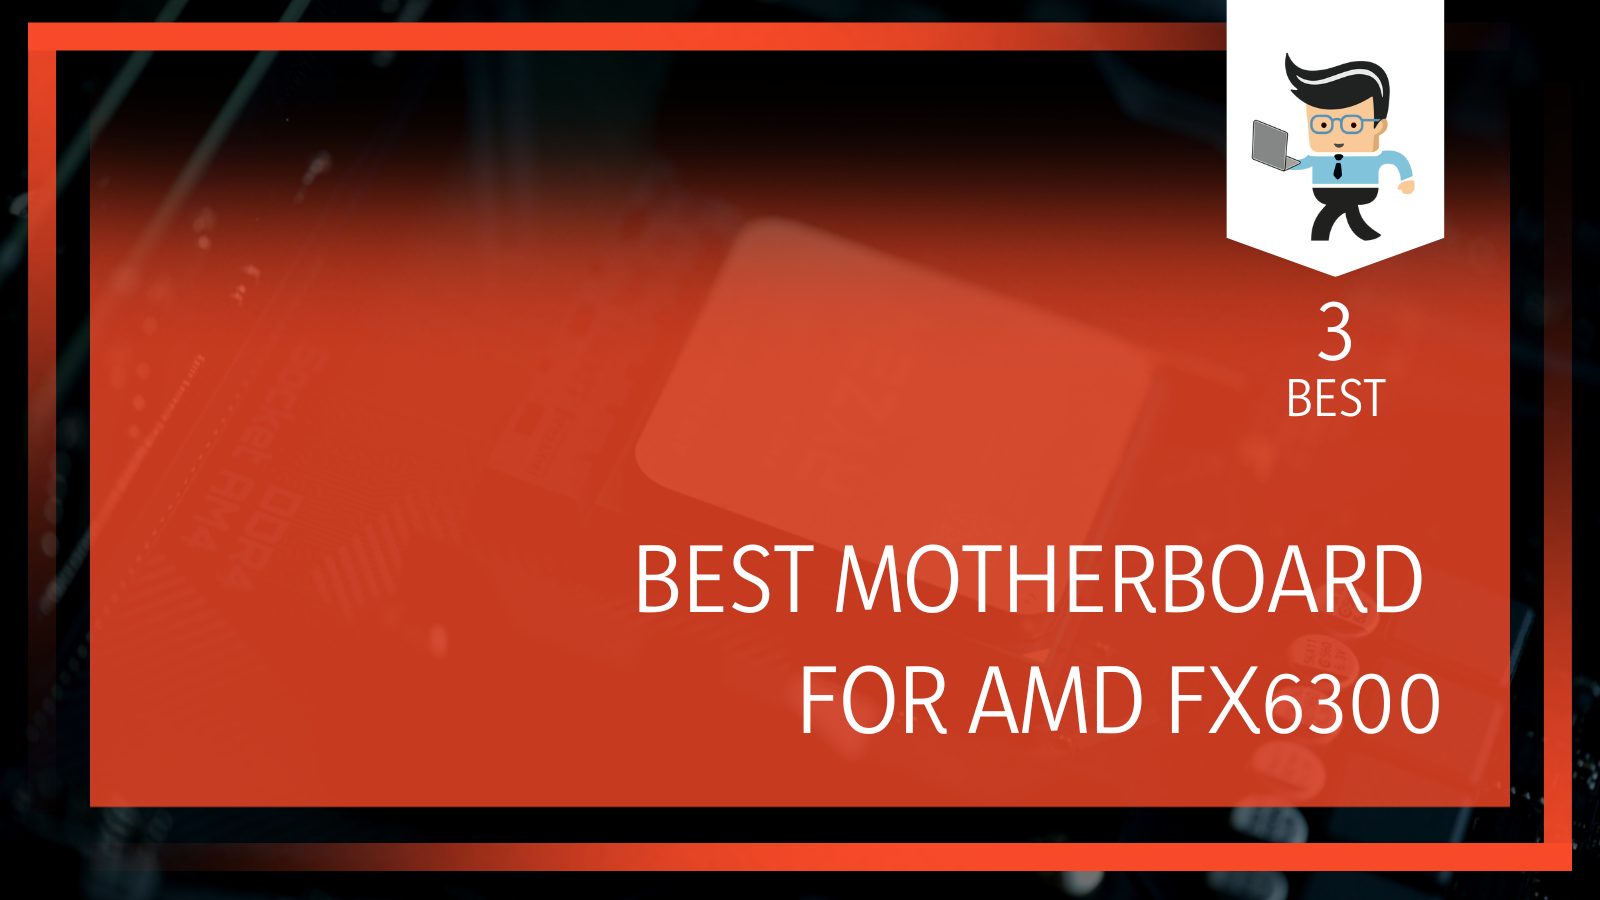 Motherboard for AMD FX